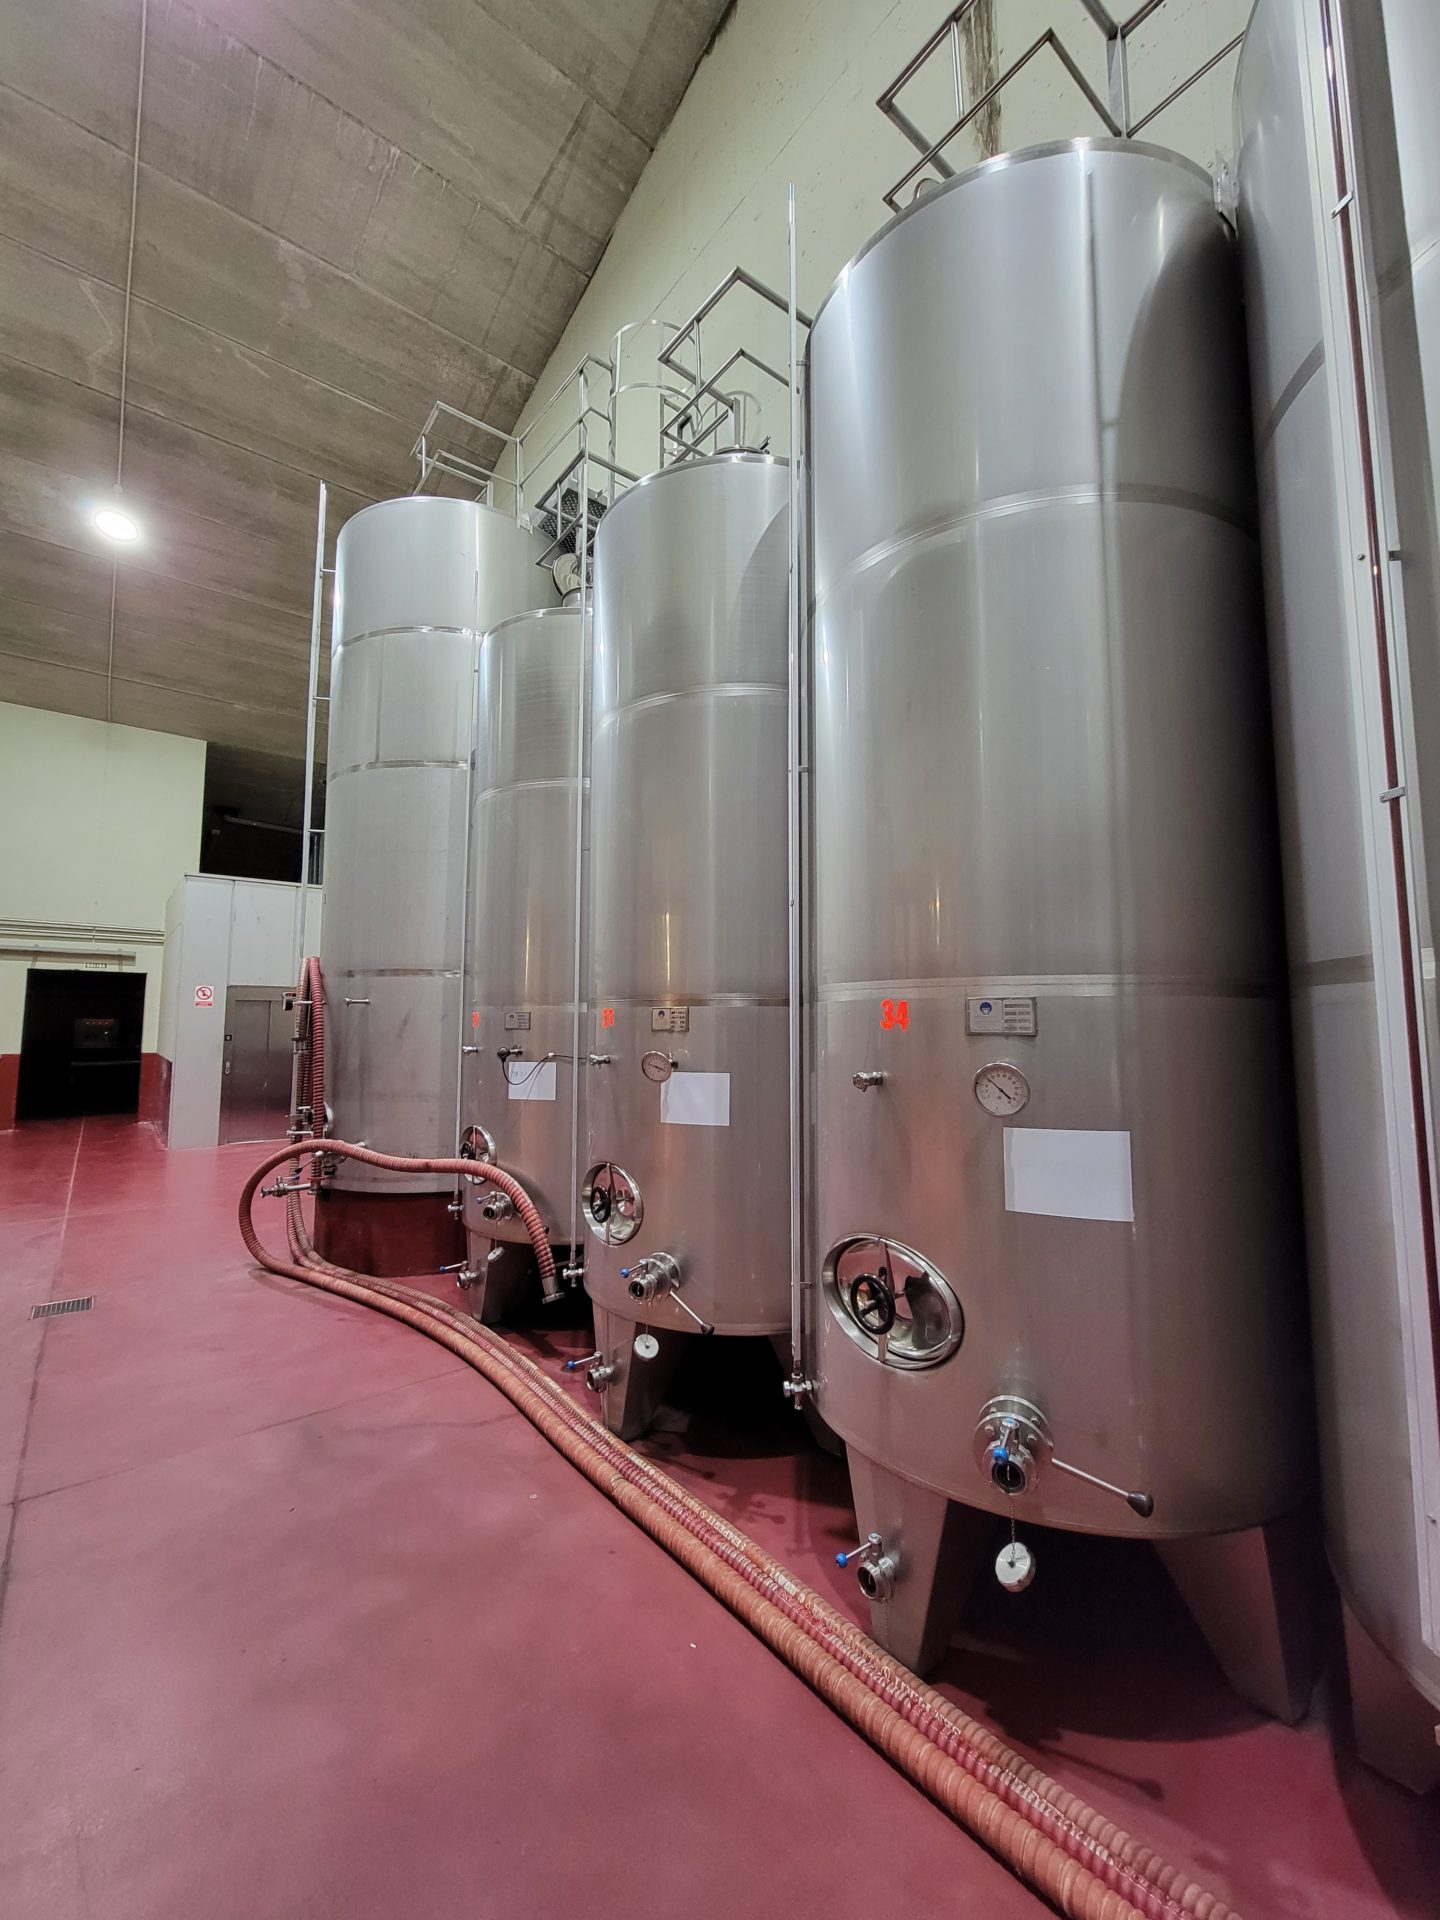 a group of large silver tanks